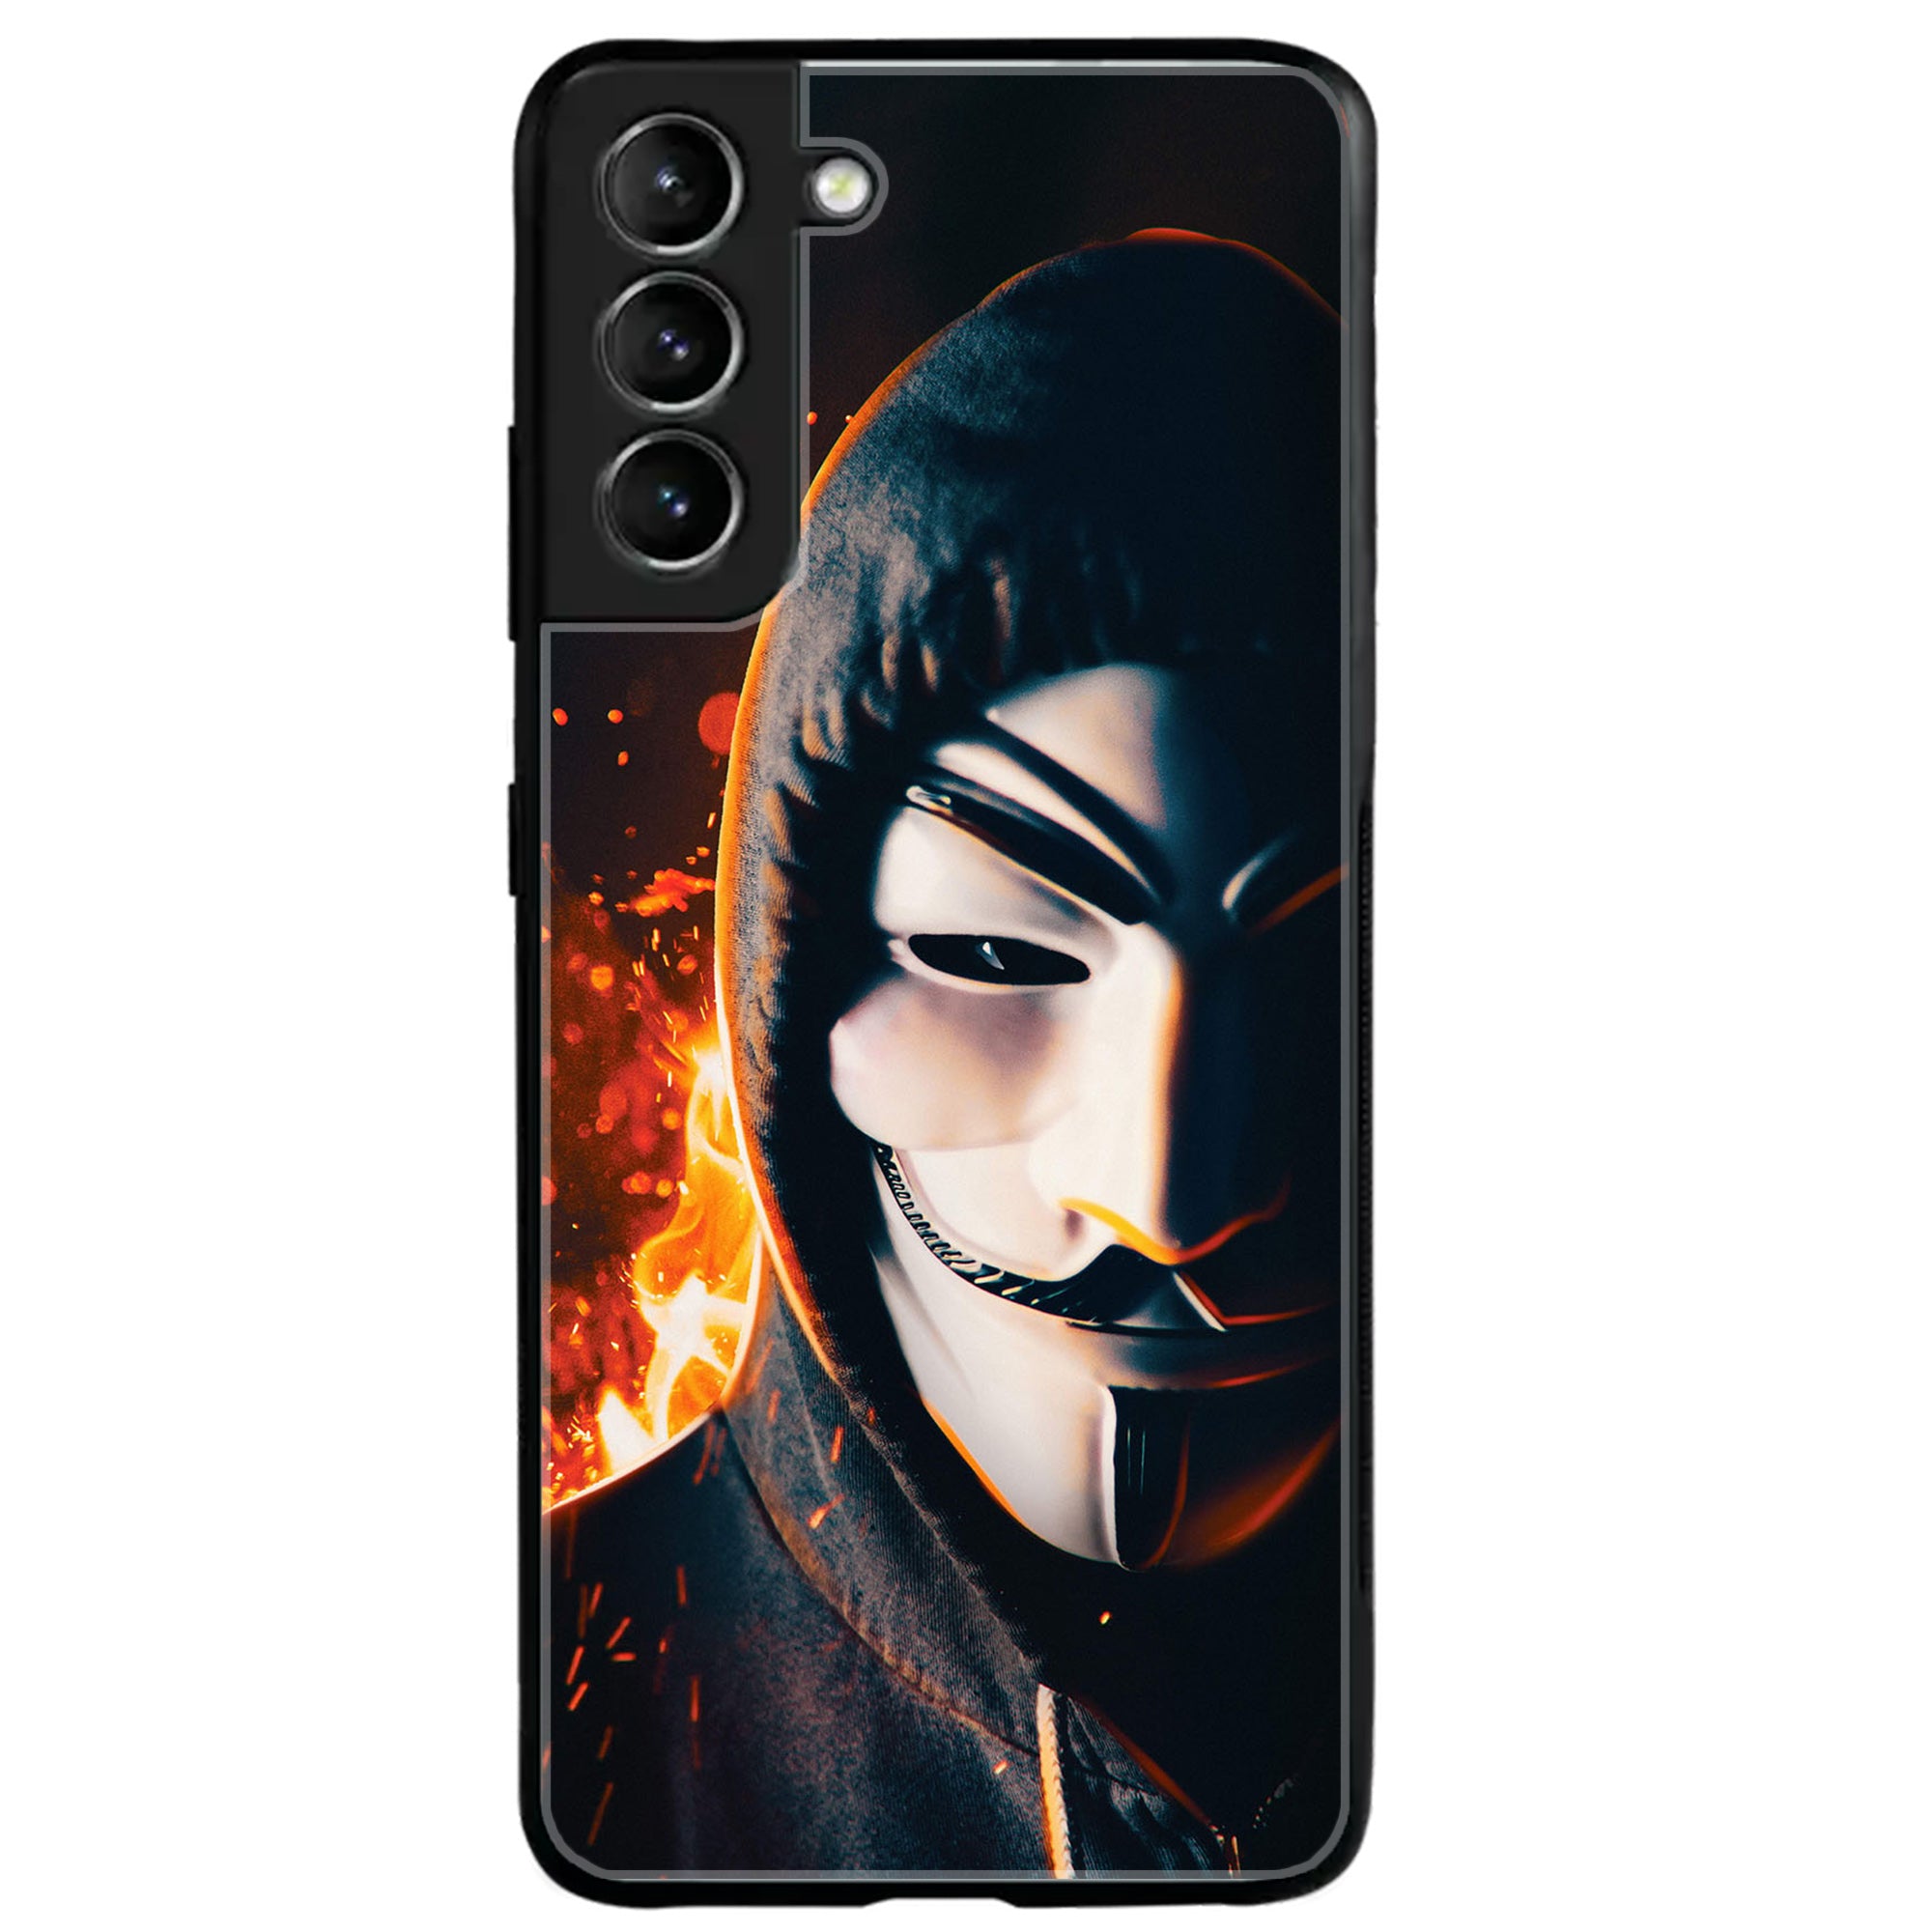 Galaxy S21 Plus - Anonymous 2.0 Series - Premium Printed Glass soft Bumper shock Proof Case